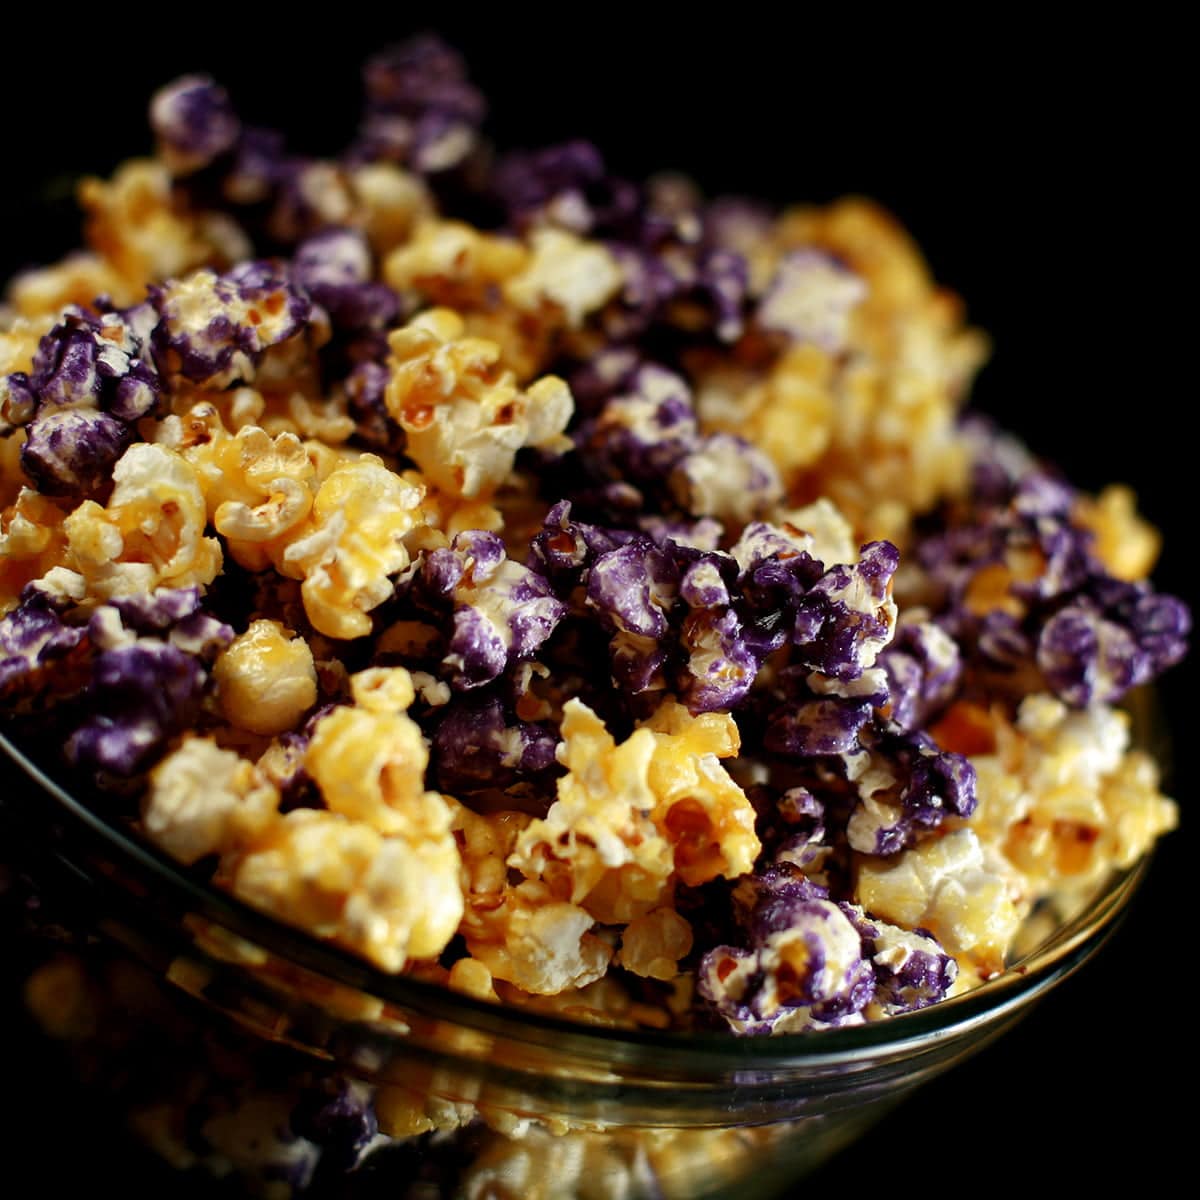 A close up view of a bowl of glazed popcorn. The game day popcorn is yellow and purple, themed around a sports team.